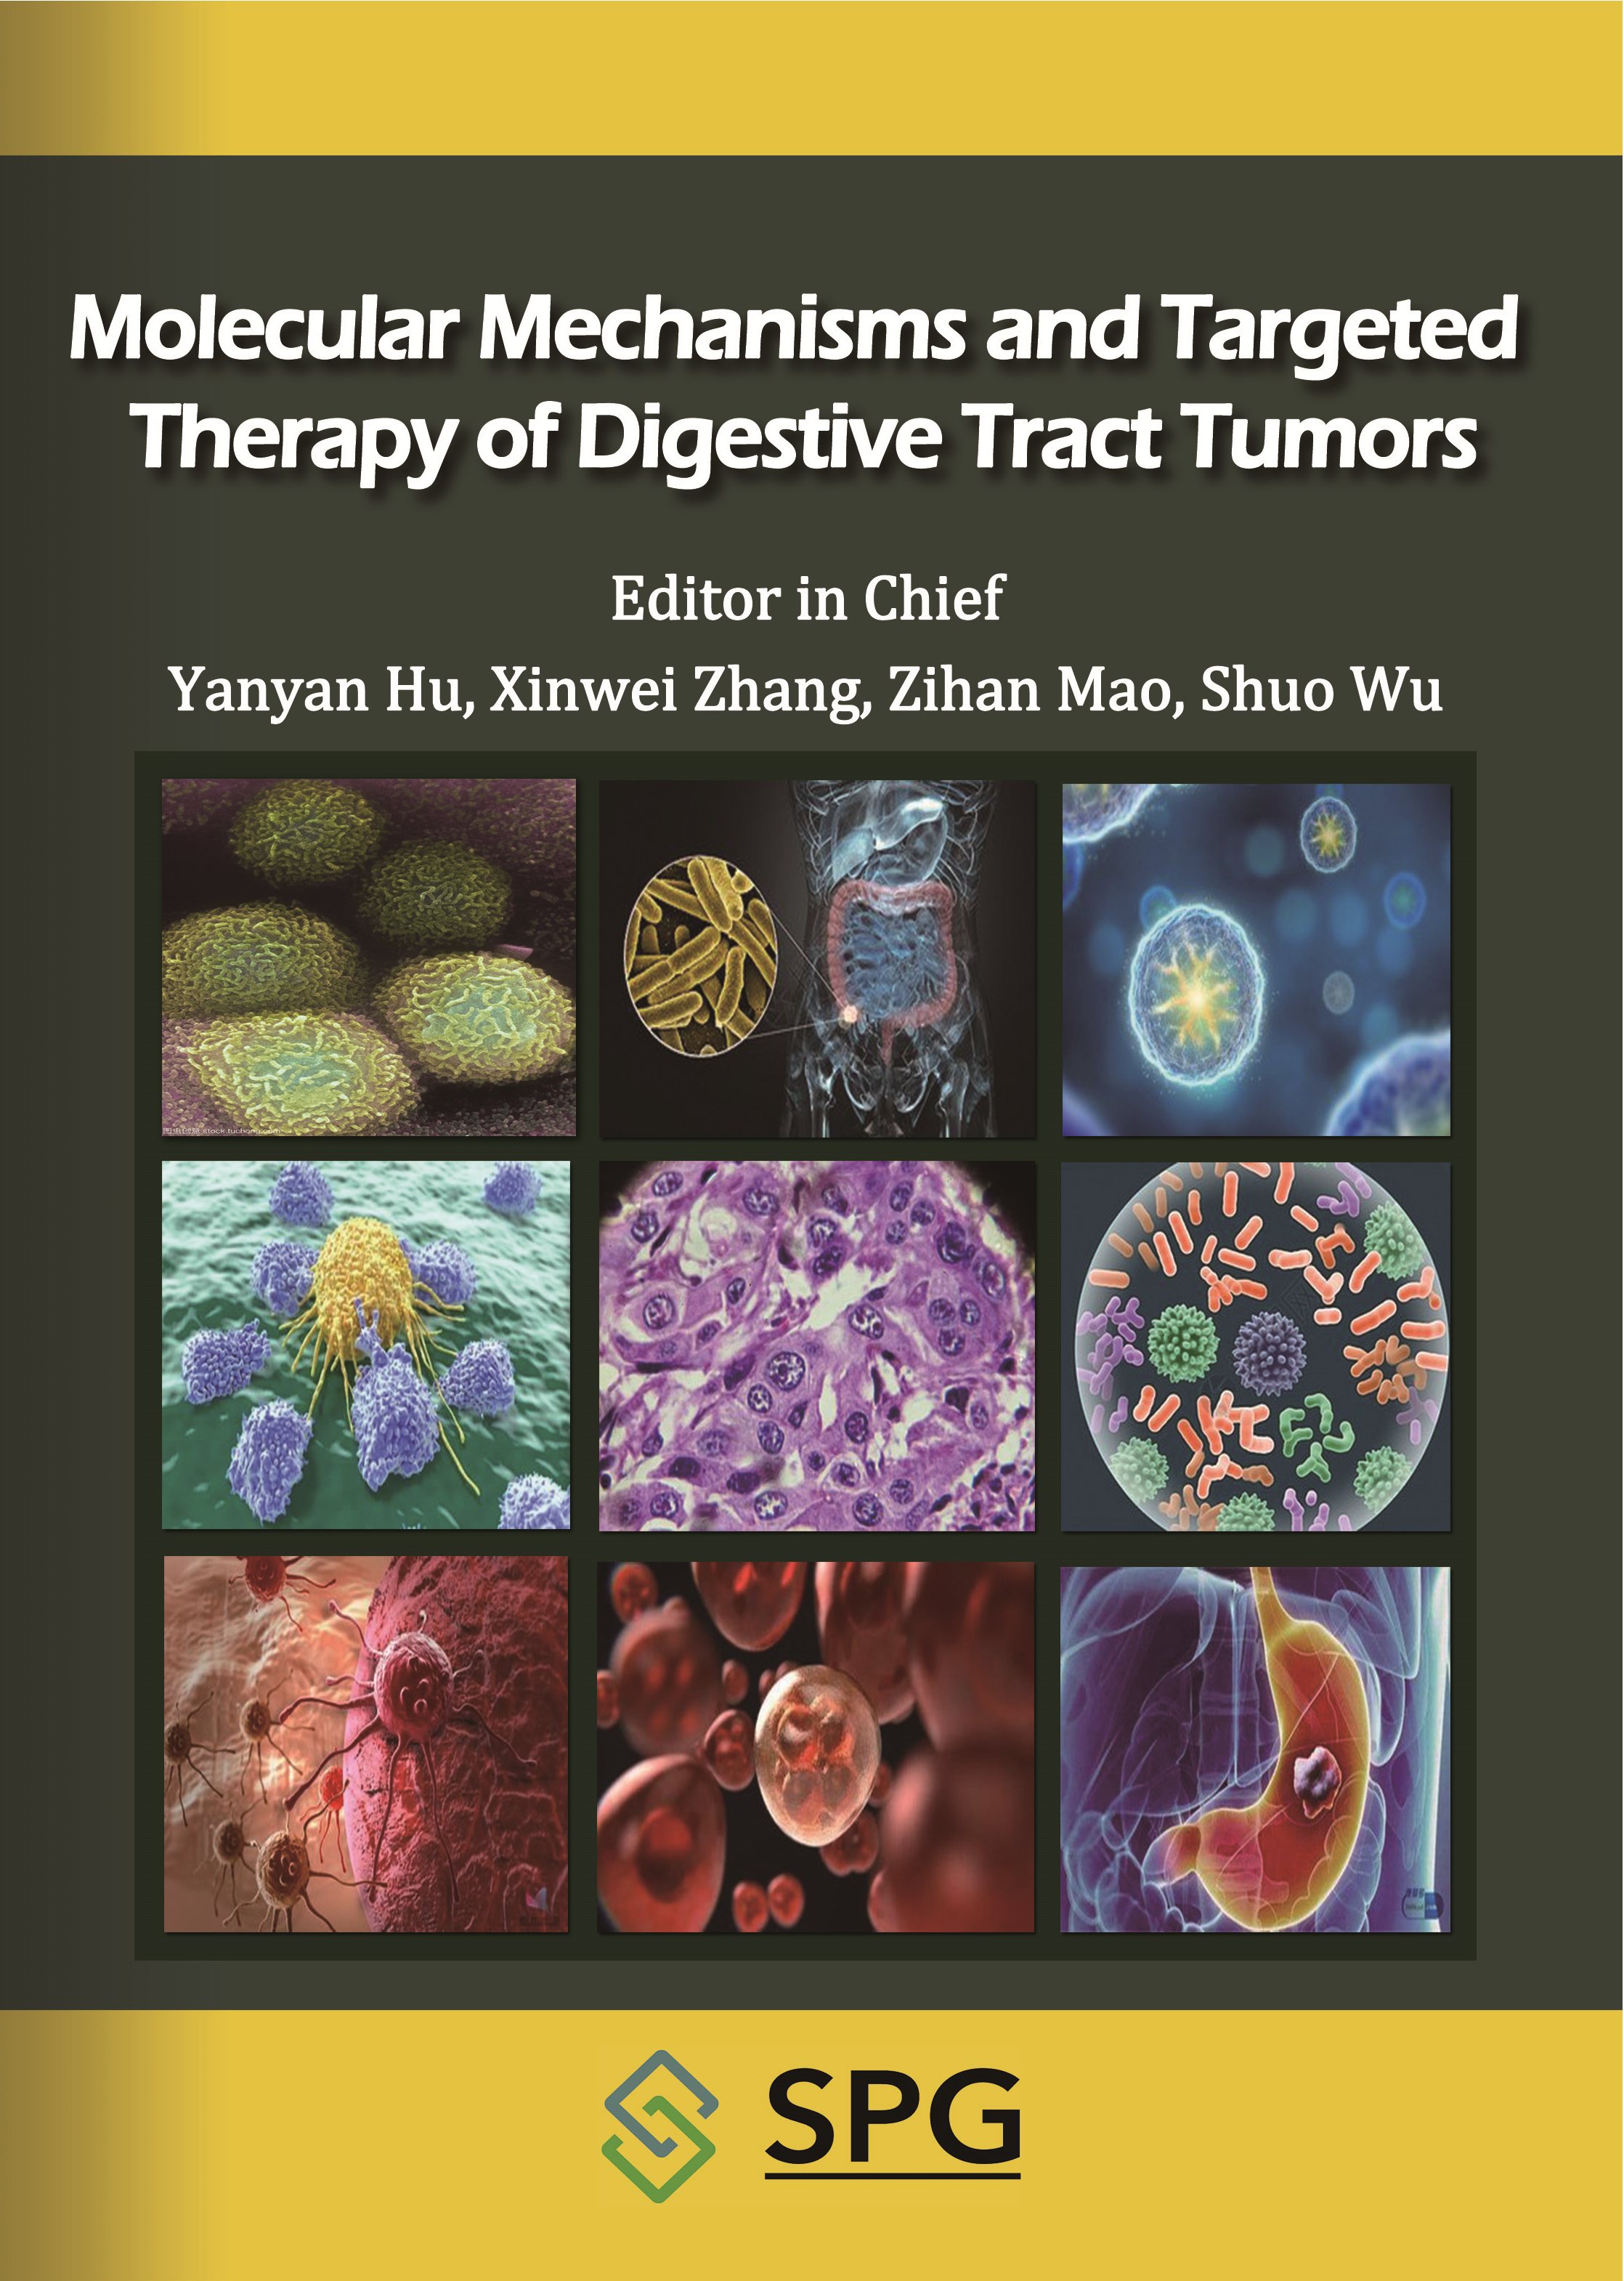 Molecular Mechanisms and Targeted Therapy of Digestive Tract Tumors | Scholar Publishing Group